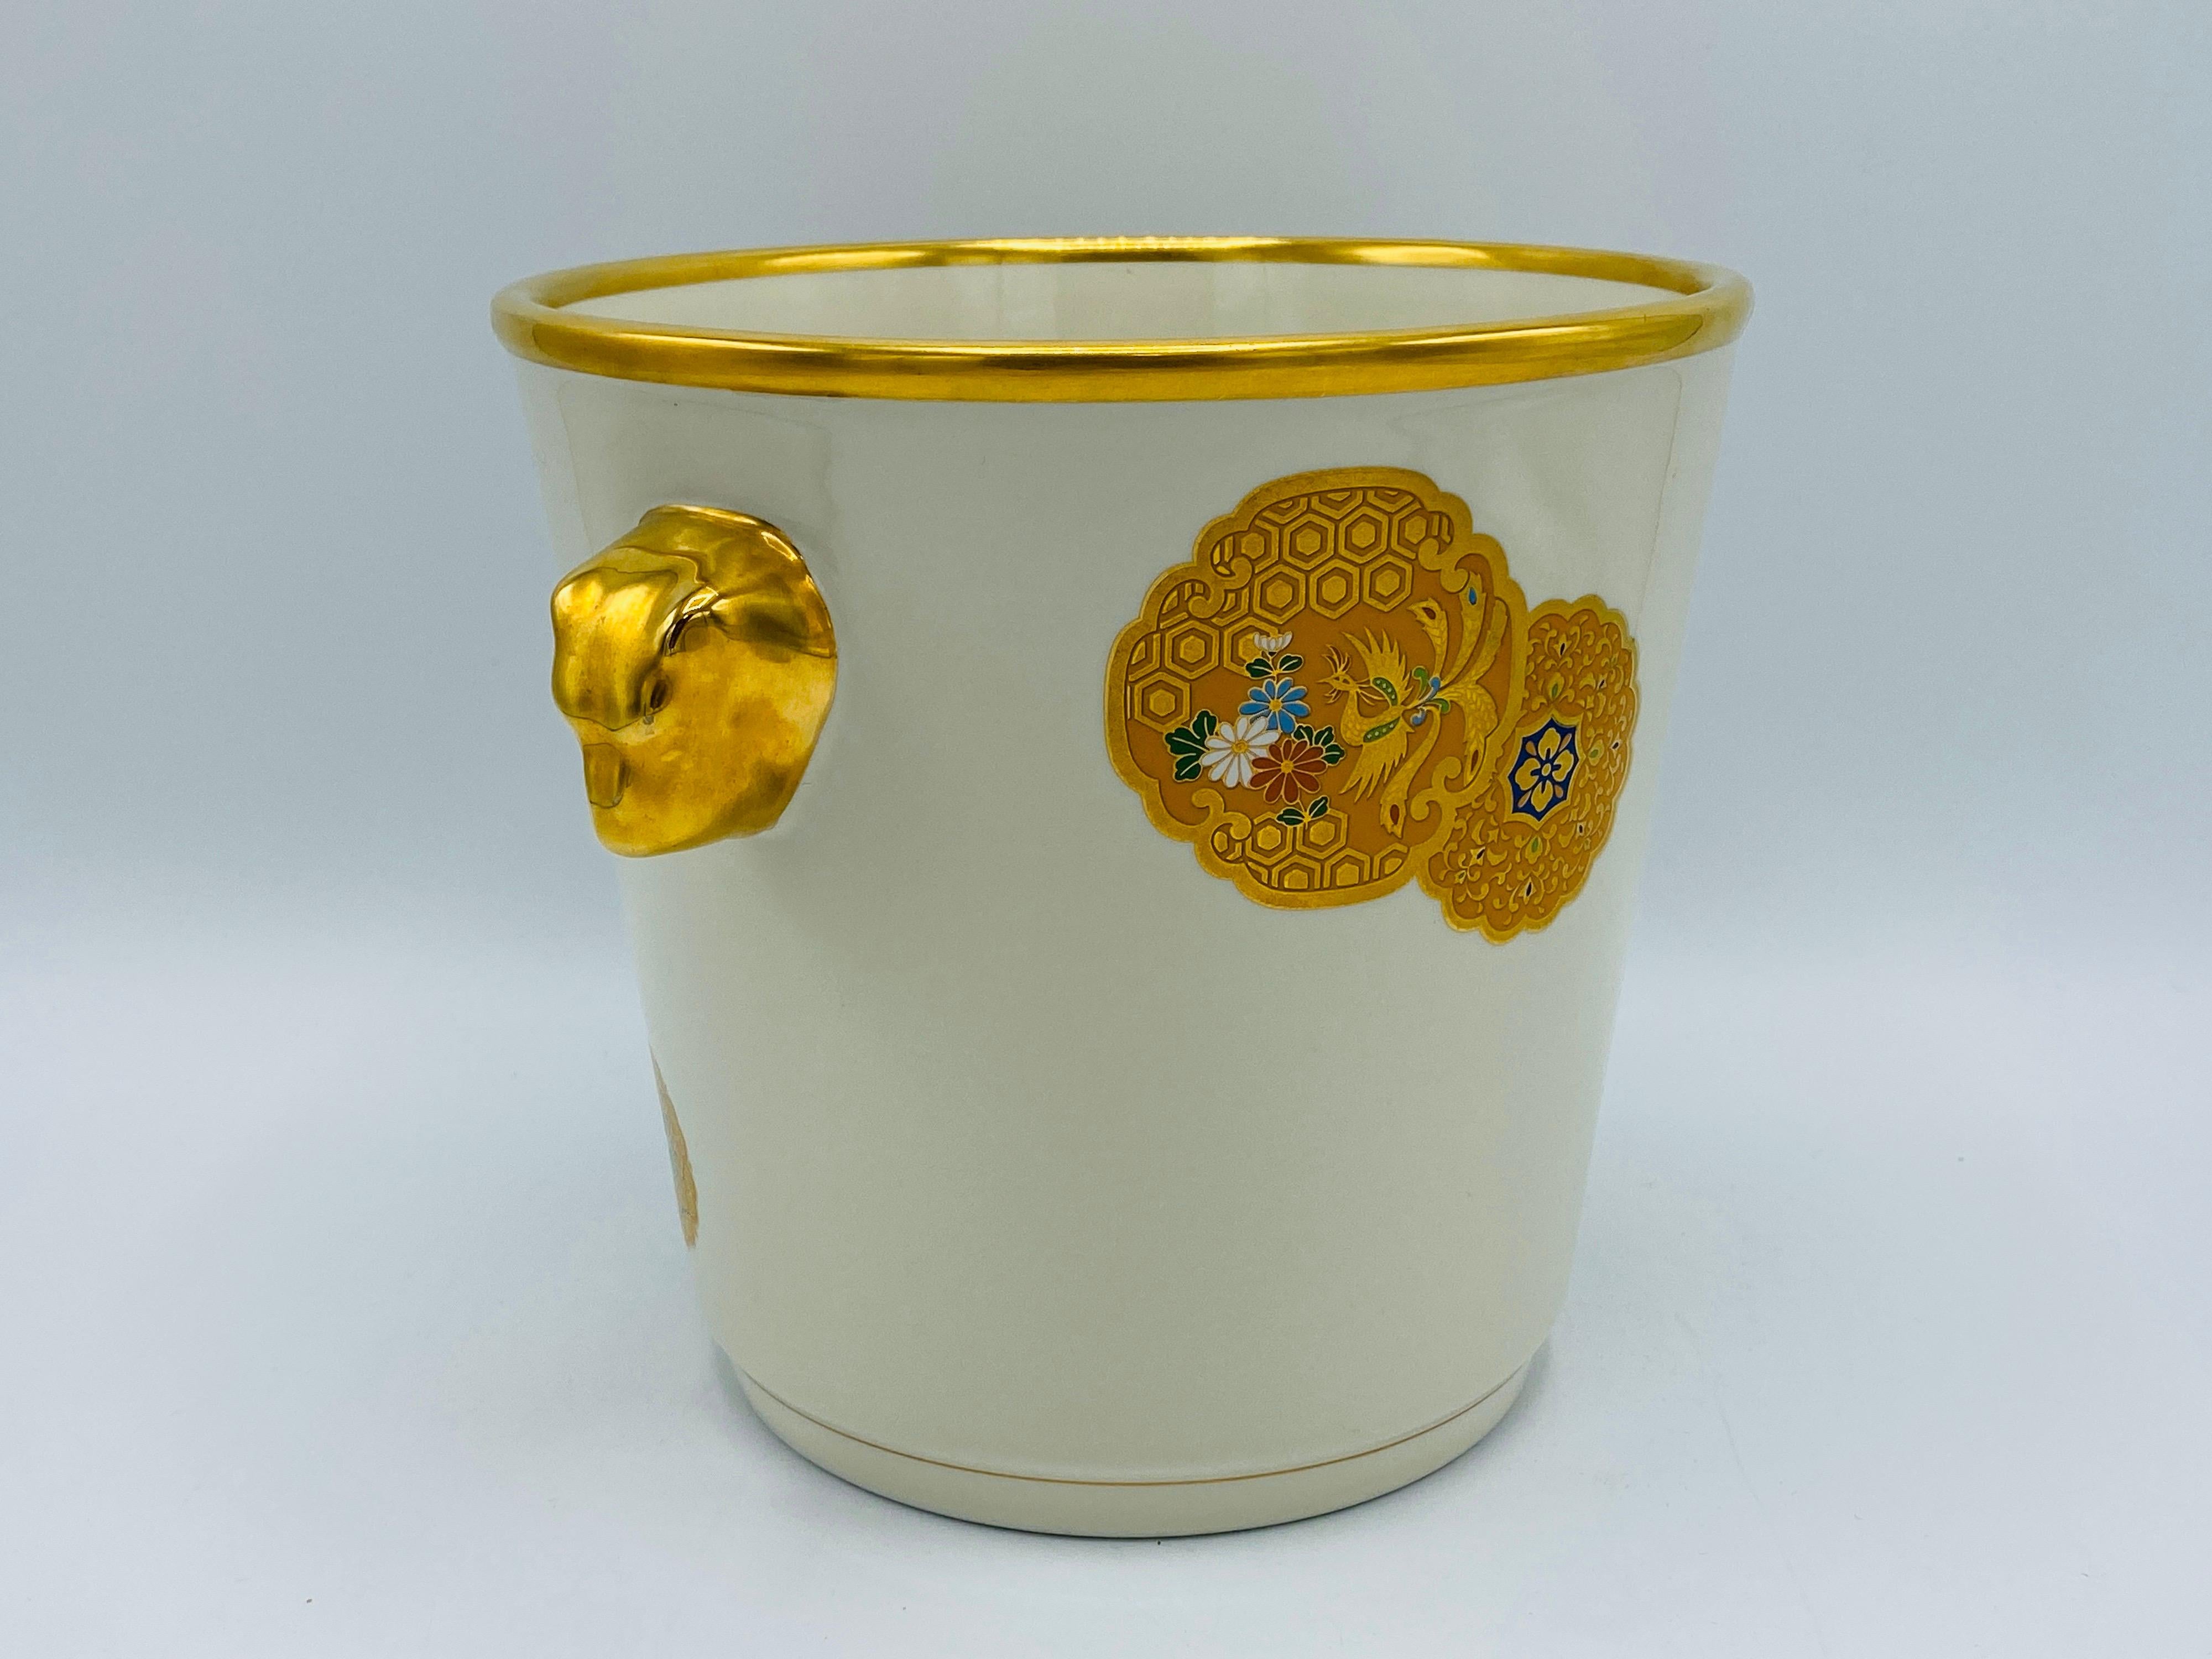 Listed is a fabulous and incredibly rare, 1970s Italian Mottahedeh champagne bucket. The piece is an ivory/white all-over with gold accents and three modern, Chinese medallions on each 'main' side and lions head handles. This would be a perfect